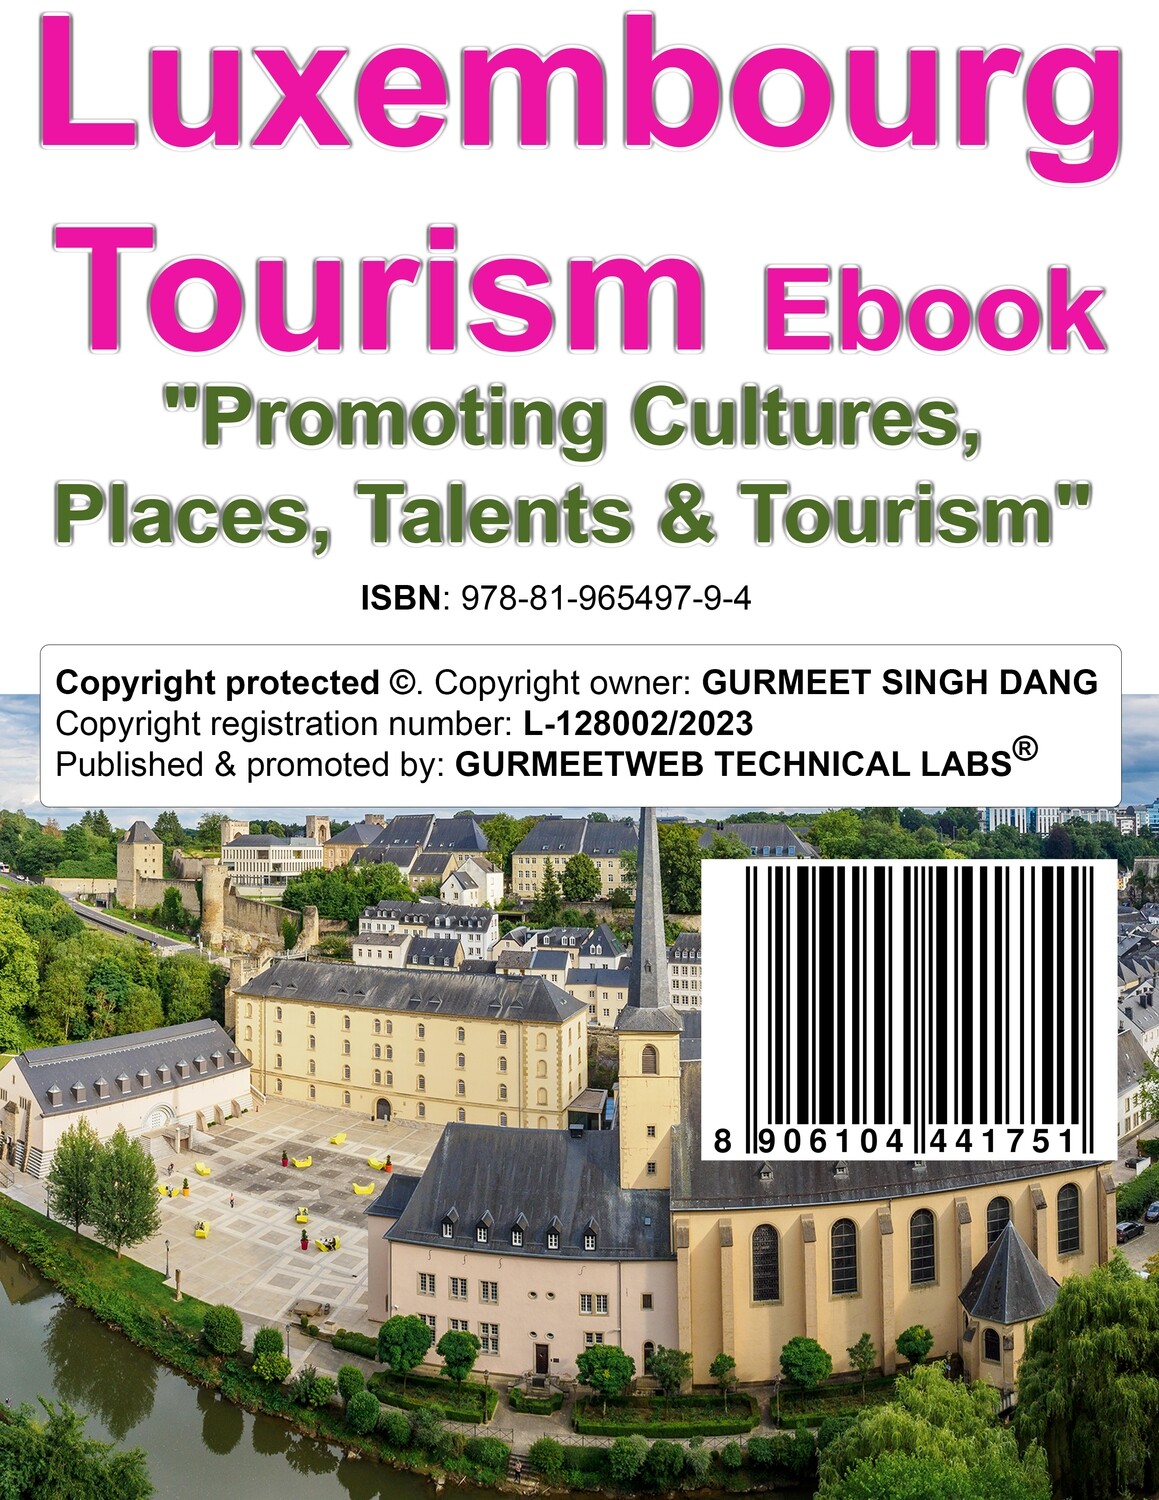 Luxembourg Tourism eBook